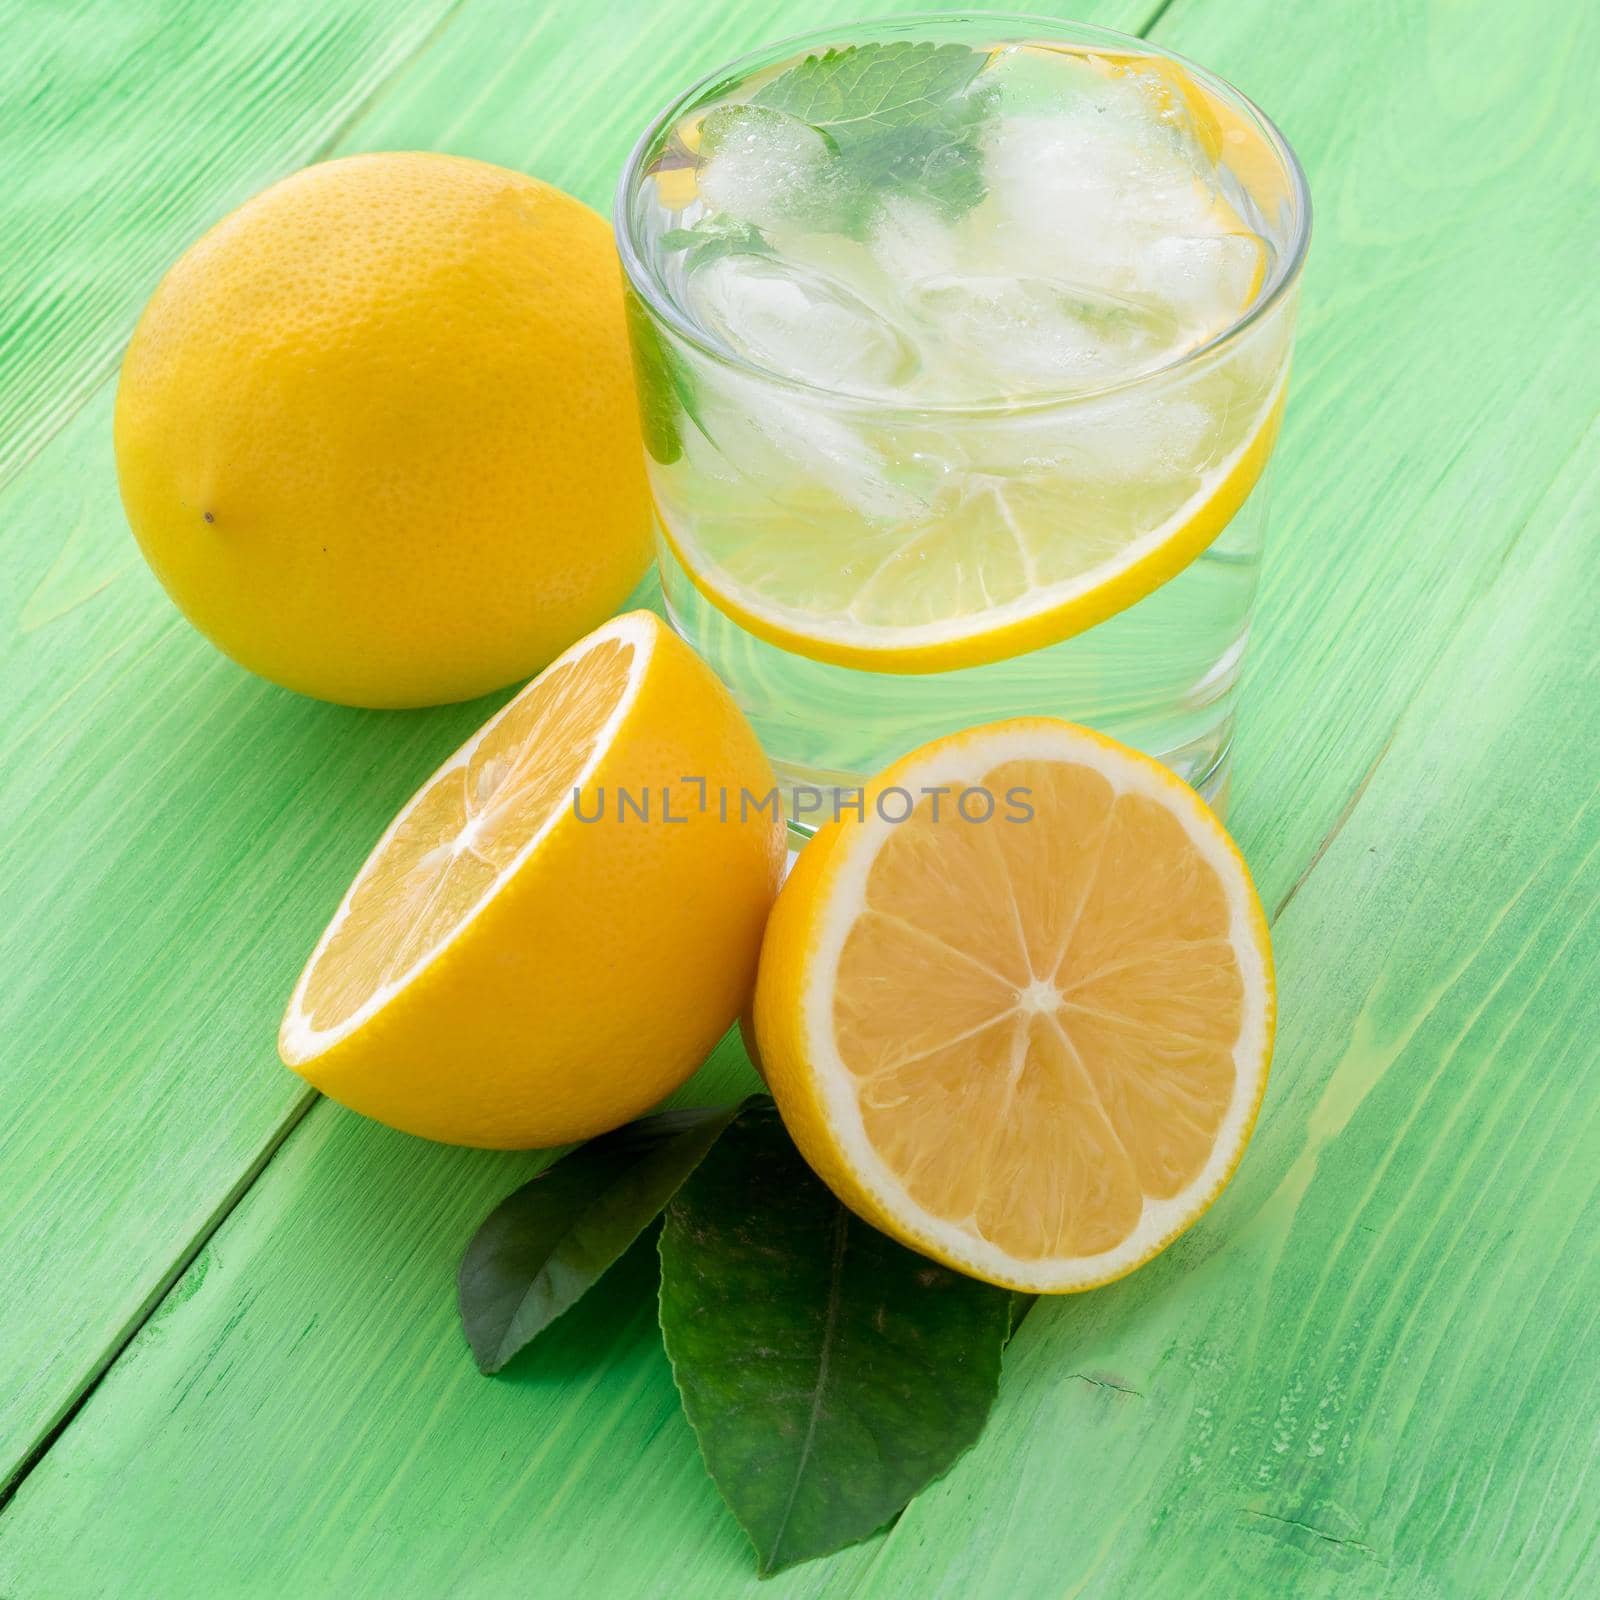 Lemonade in a glass, a lemon half, fresh leaves on the green table. A refreshing cold drink of water with ice, mint and slices of lemon, side view by NataBene